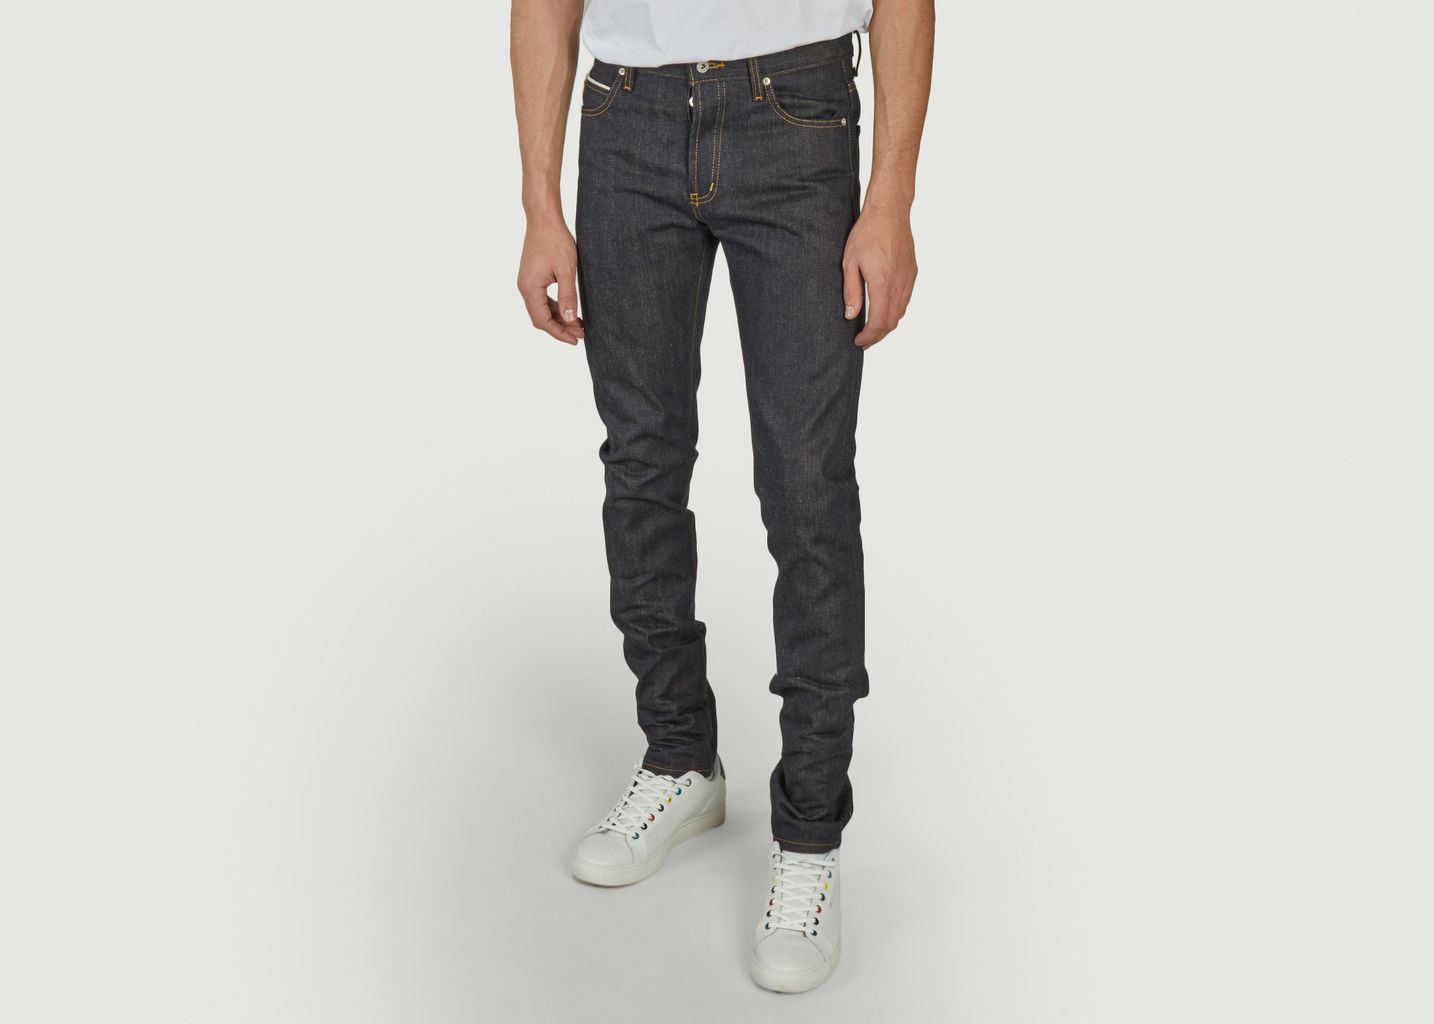 Jean Super Guy Pagoda Dyed Selvedge - Naked and Famous